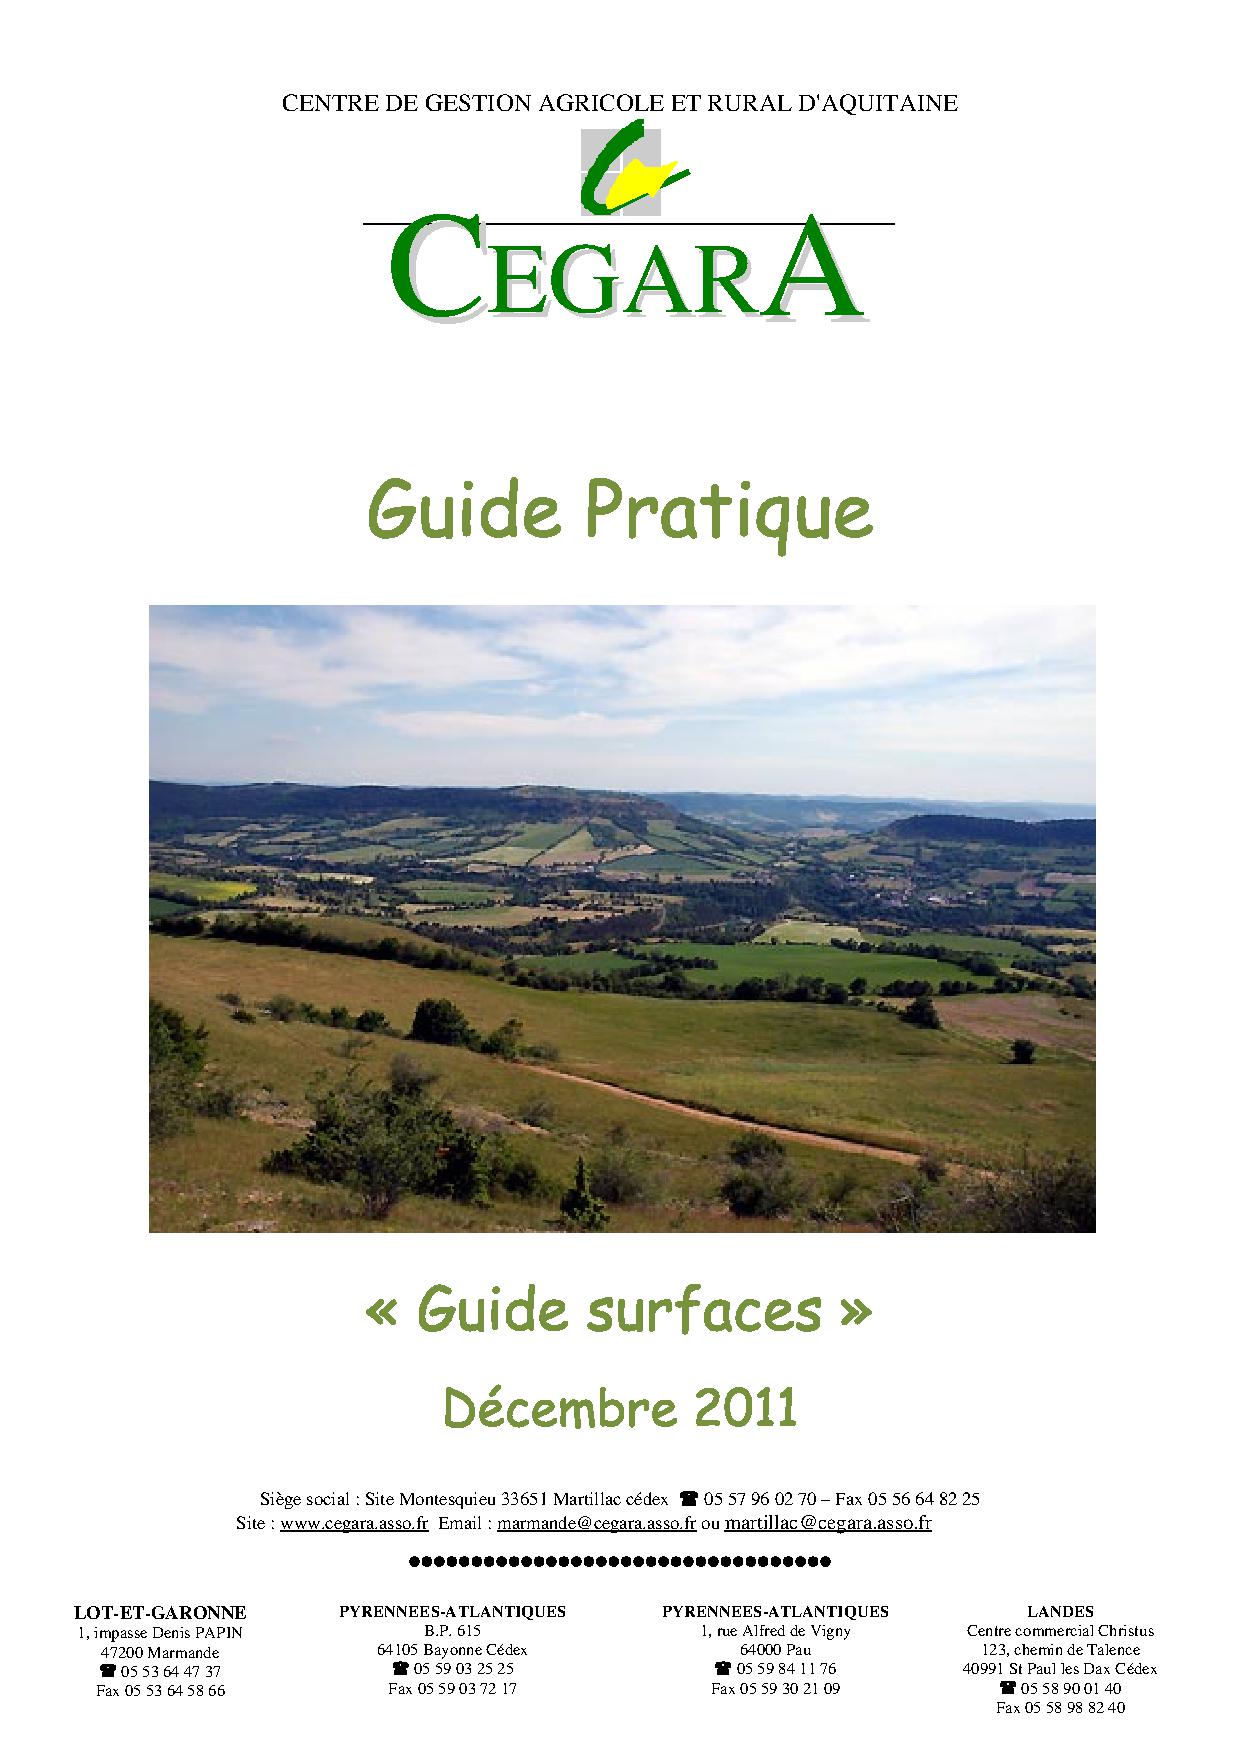 Guide surfaces